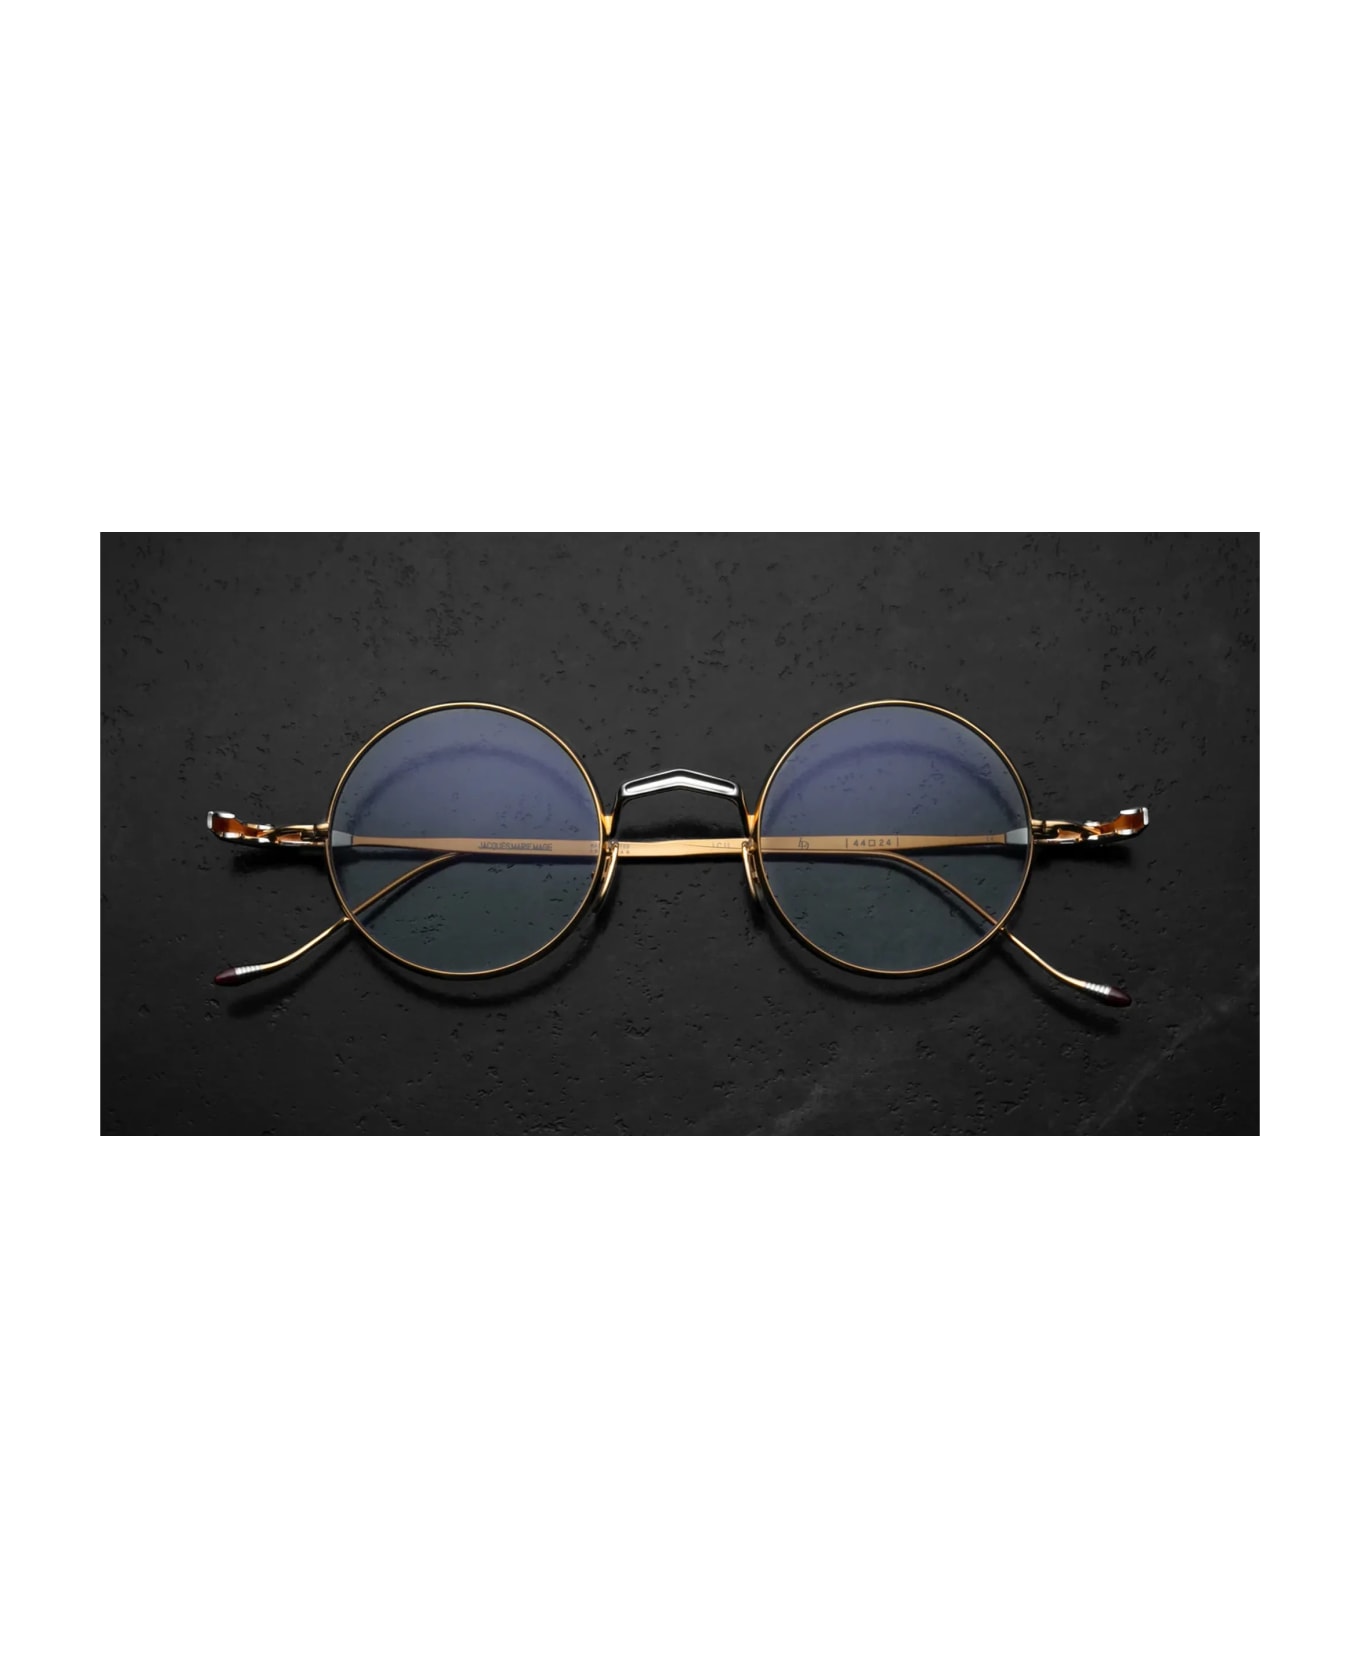 Jacques Marie Mage Icu - Gold Rx Glasses - Gold